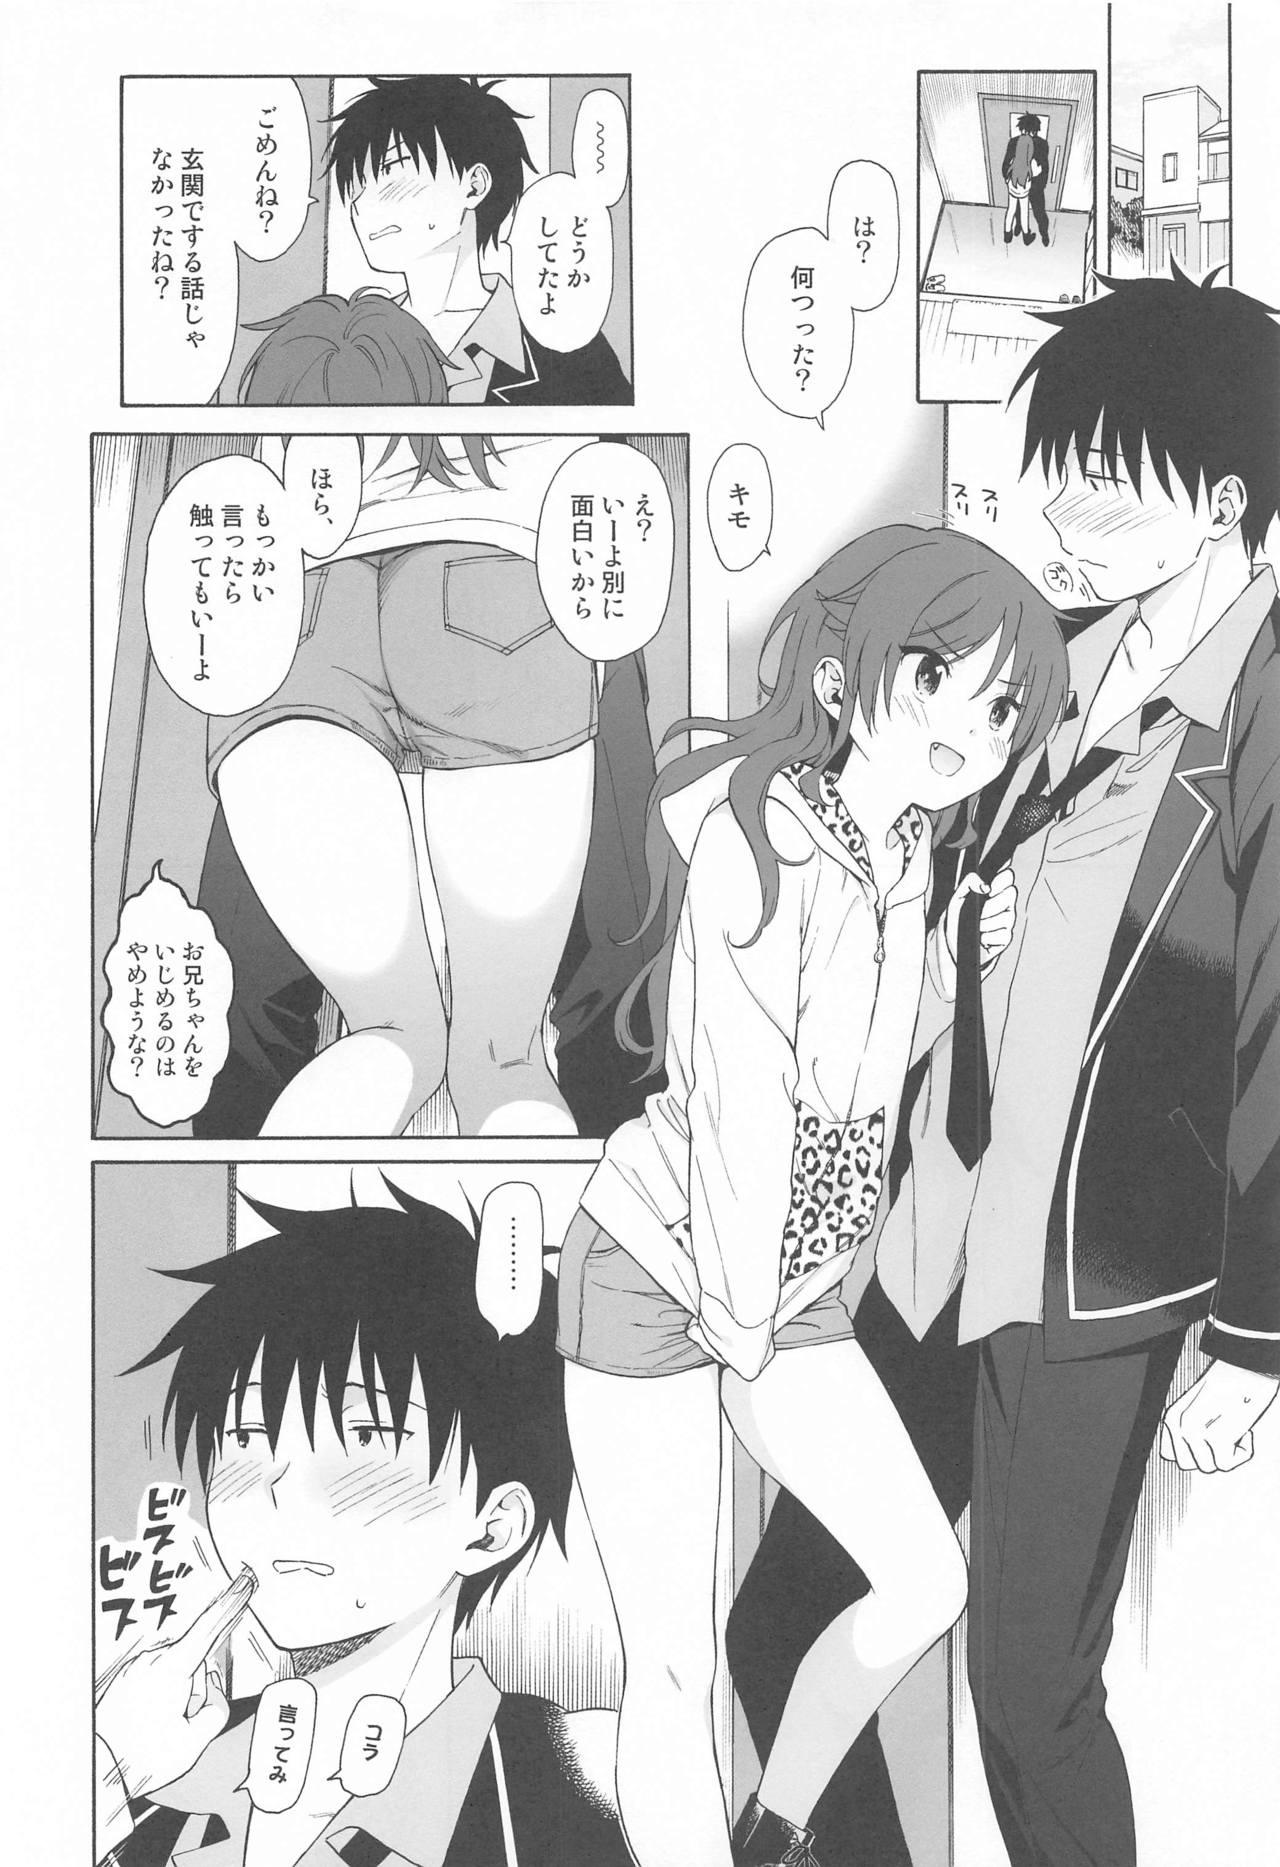 Story Imouto Manual - Qualidea code Trimmed - Page 9